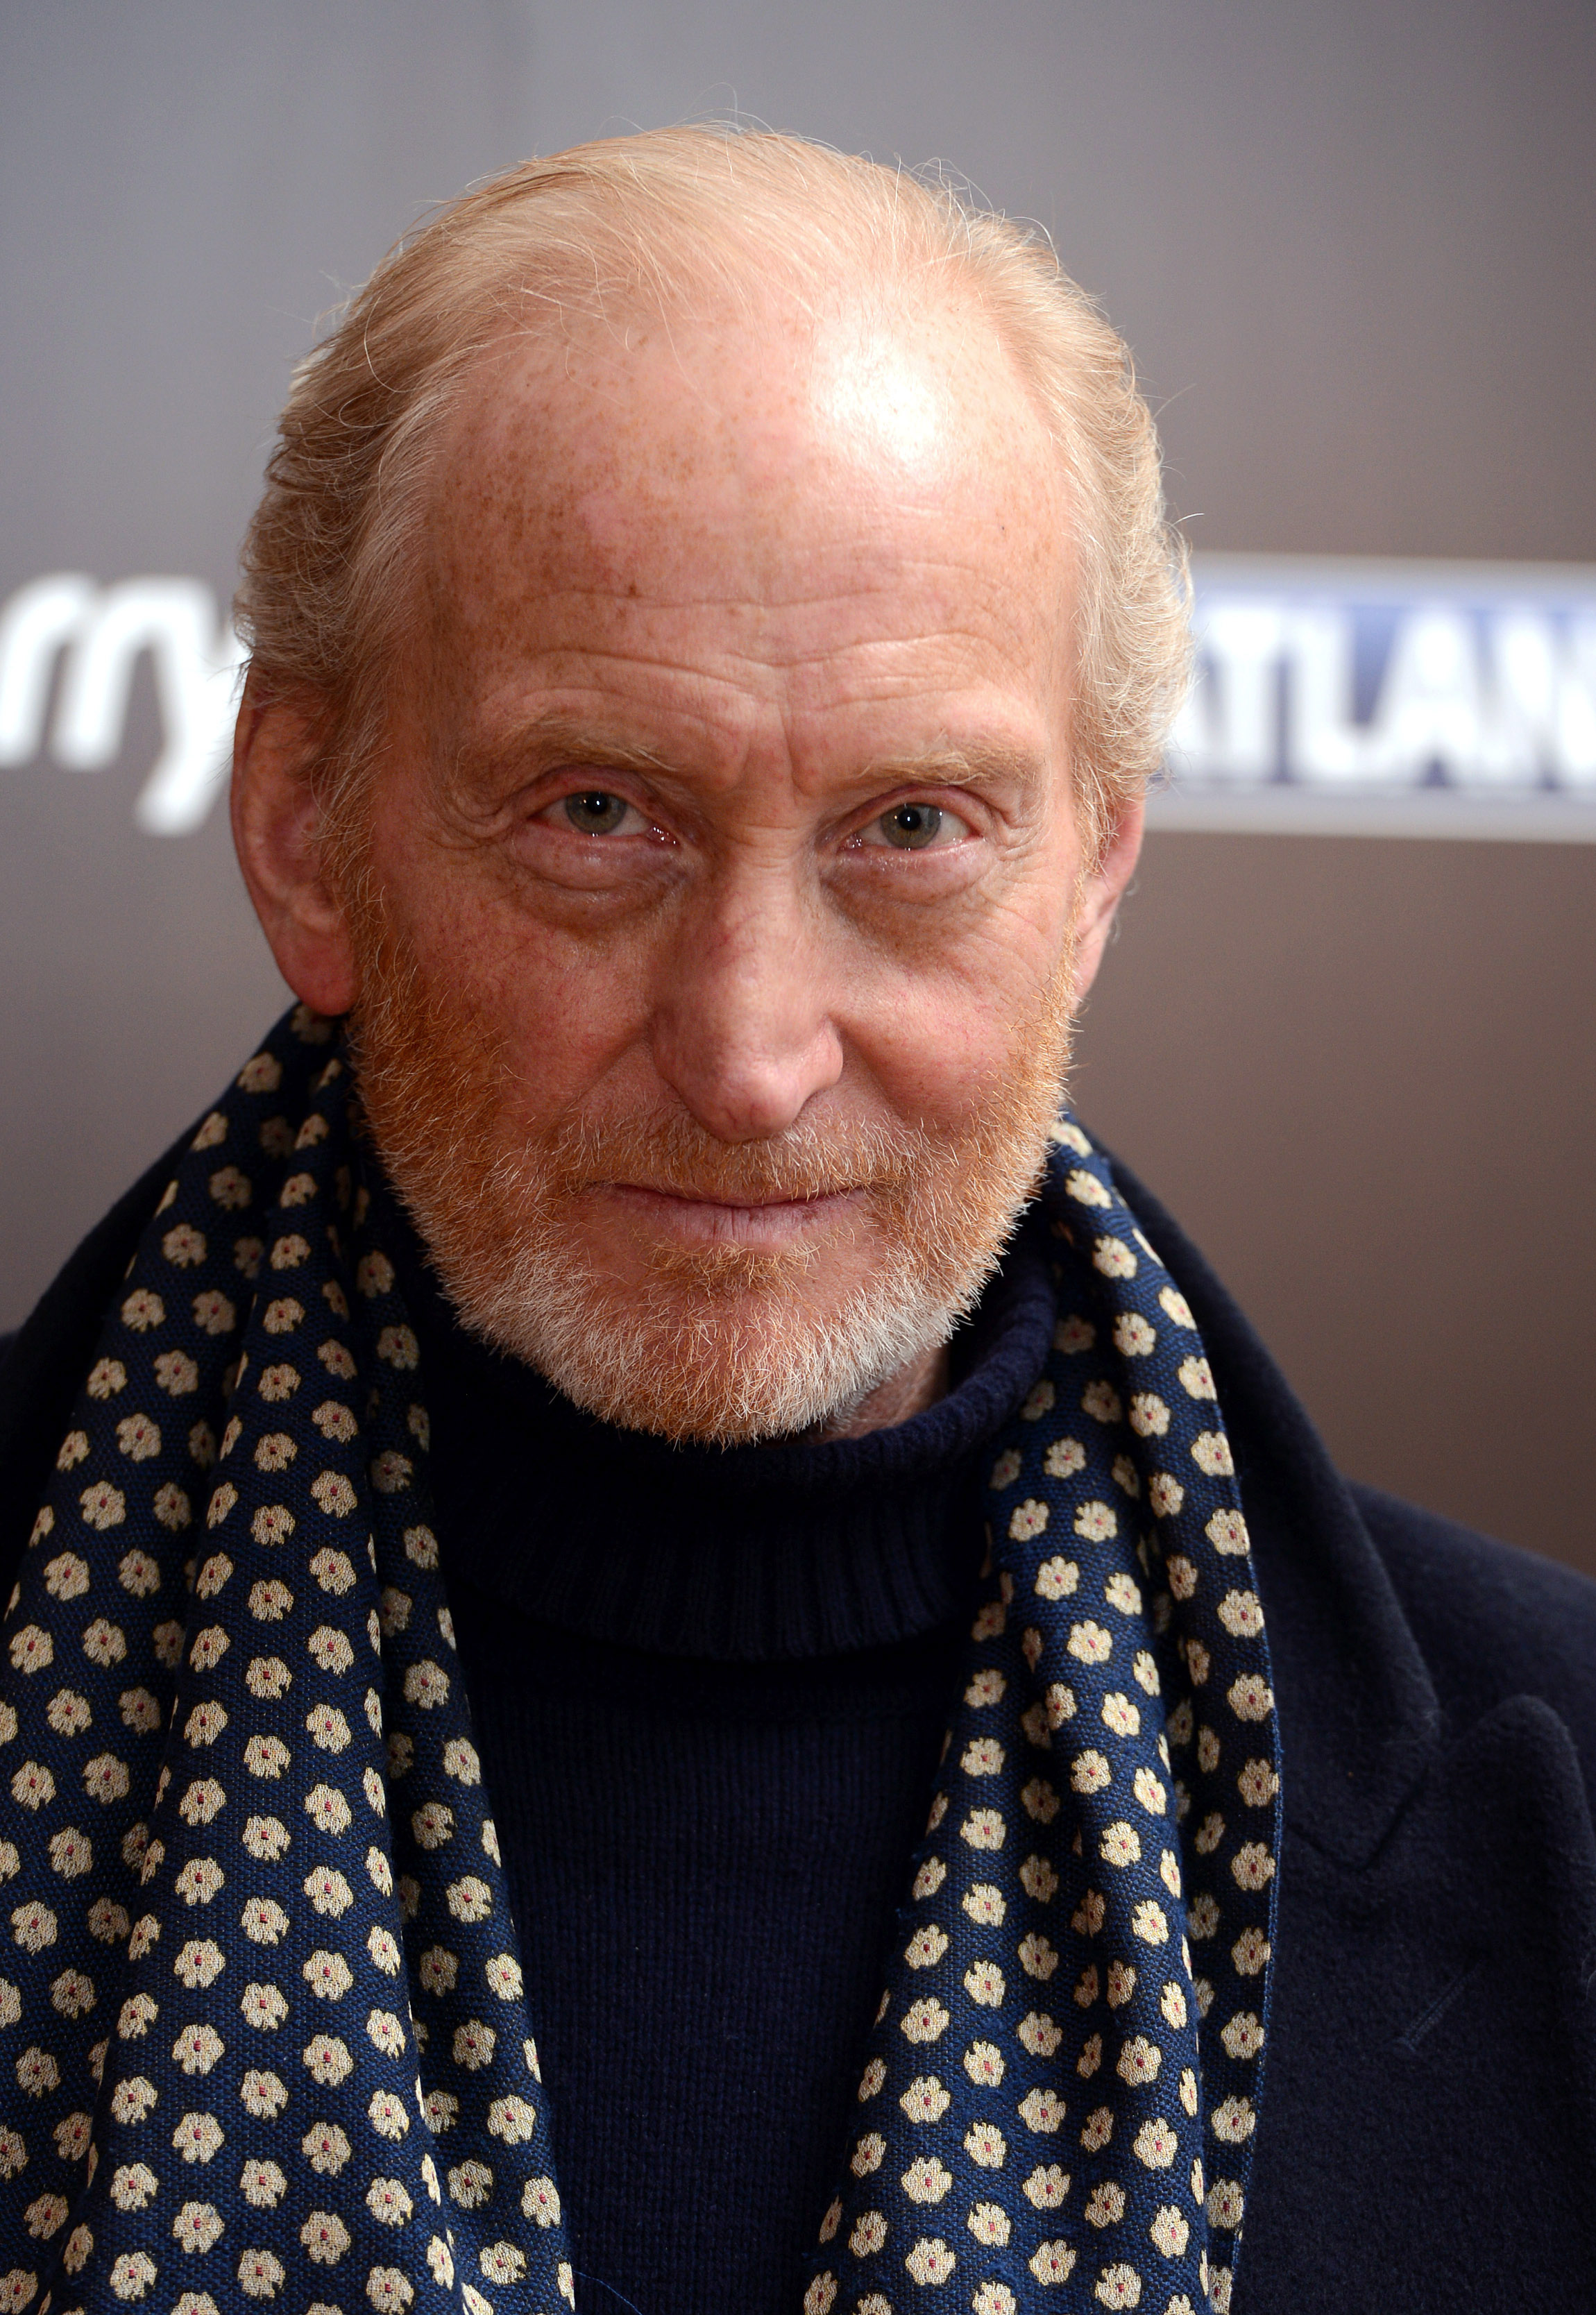 Charles Dance attends the season launch of "Game of Thrones" at One Marylebone on March 26, 2013, in London, England. | Source: Getty Images